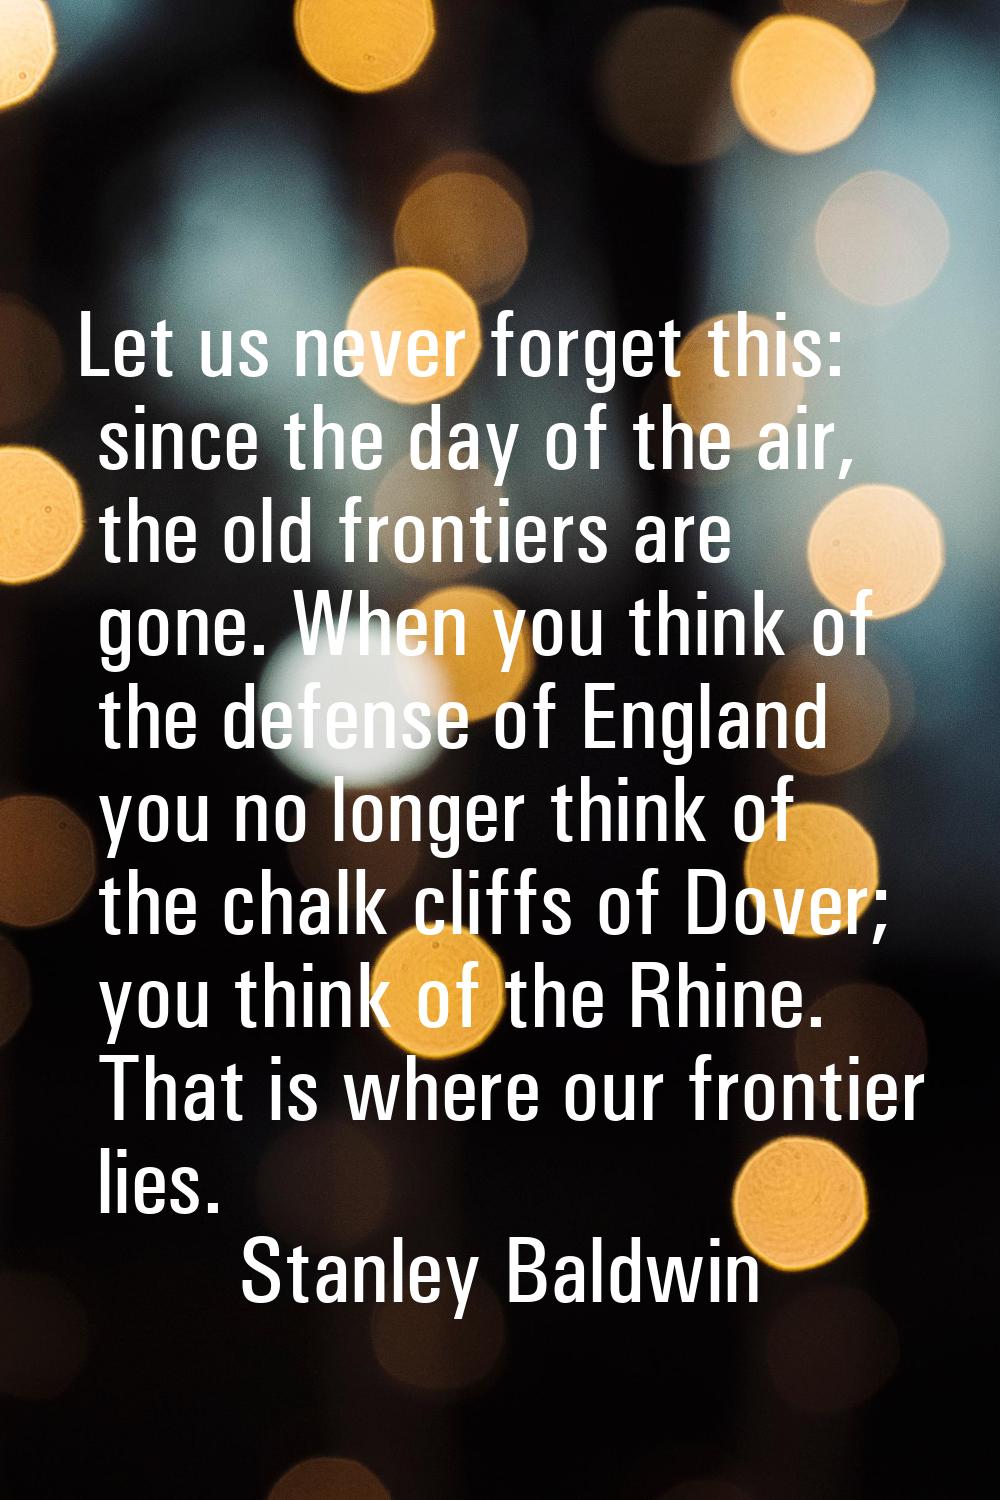 Let us never forget this: since the day of the air, the old frontiers are gone. When you think of t